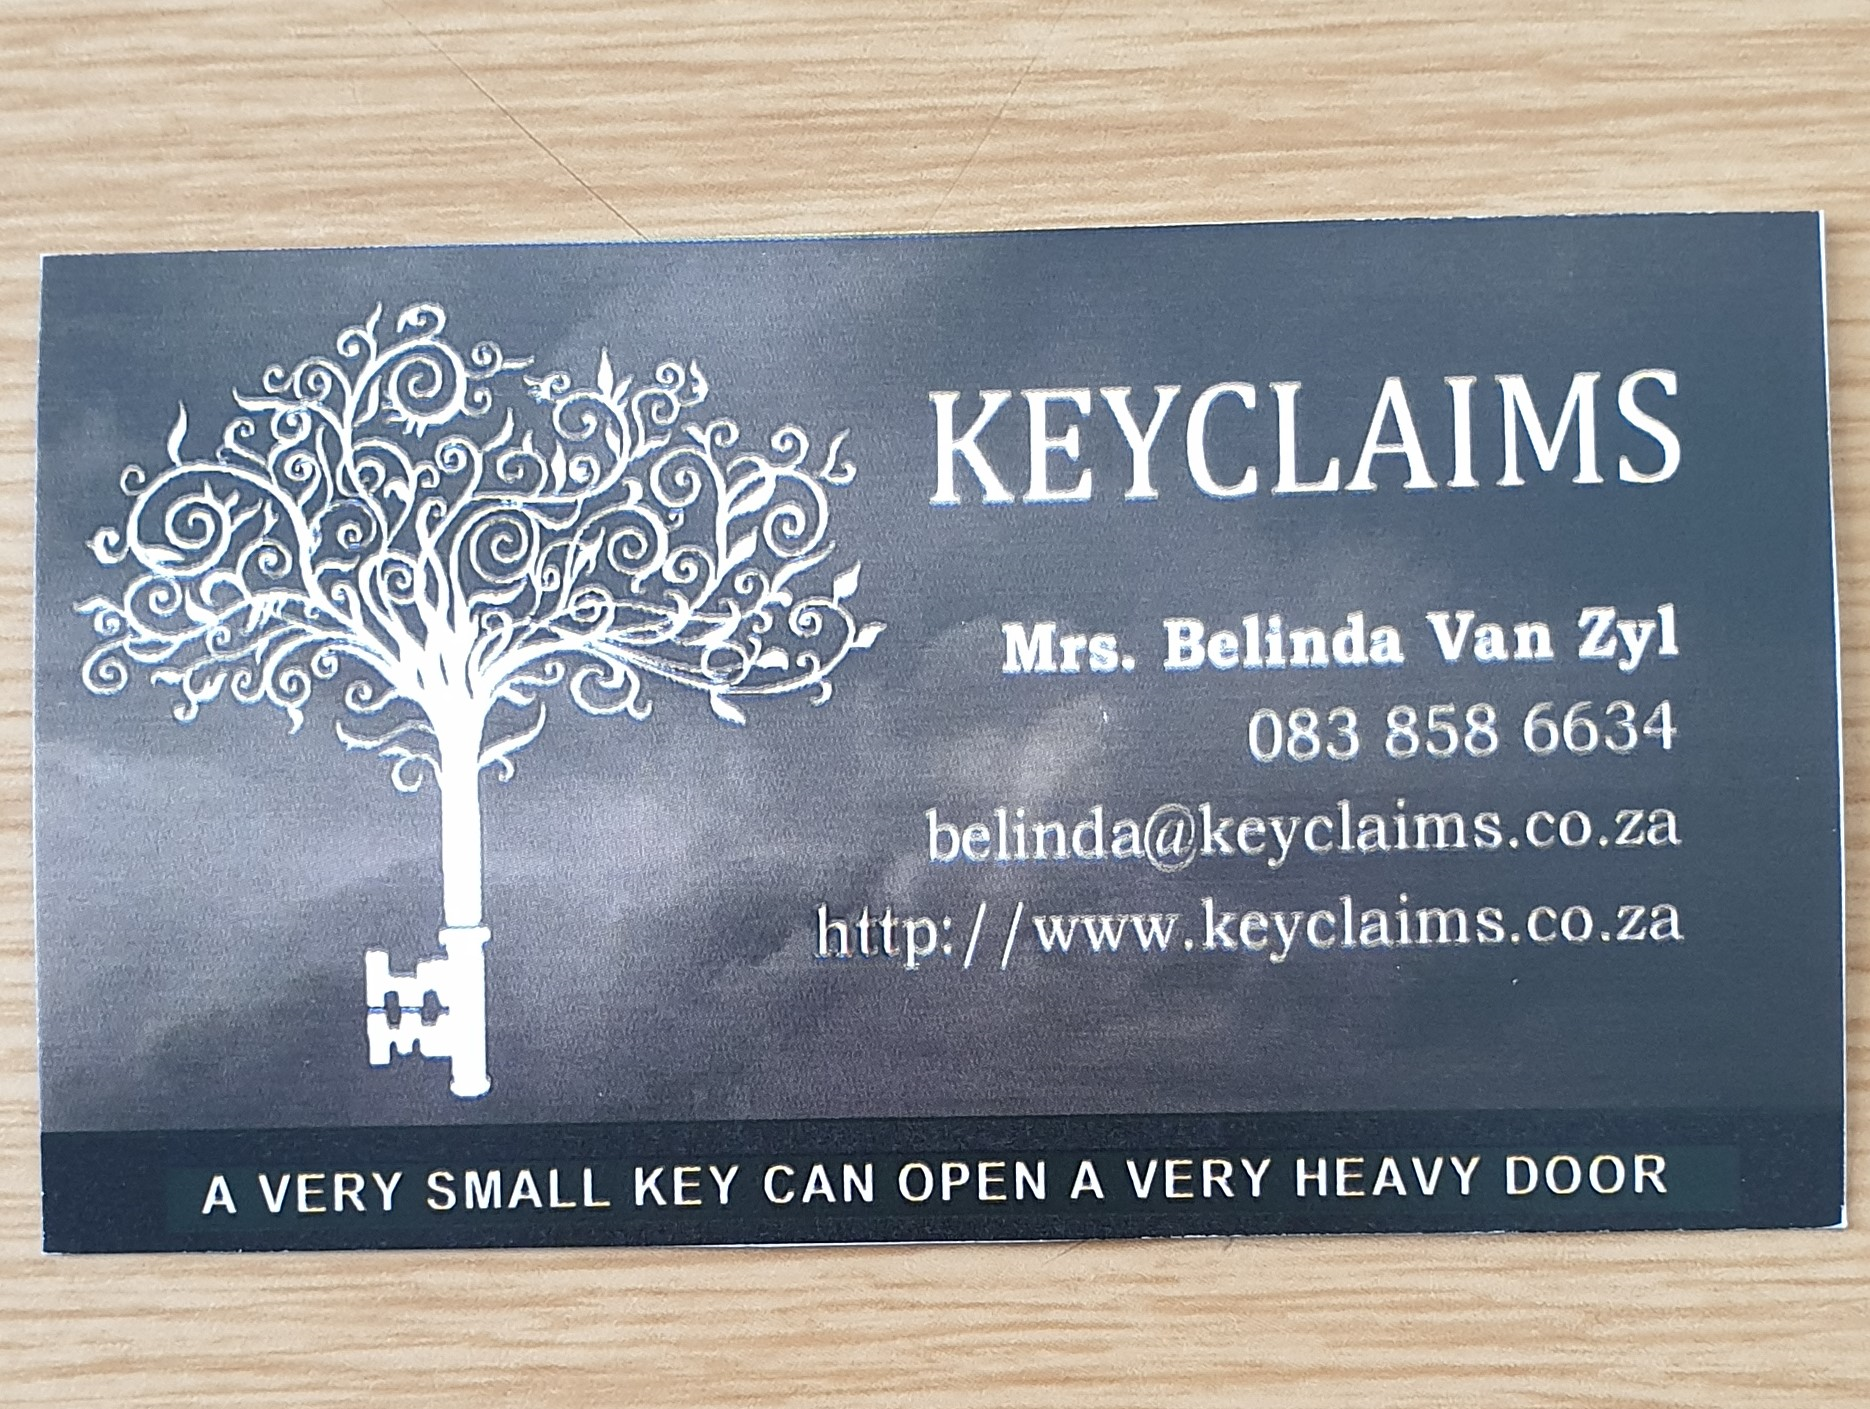 Keyclaims business card